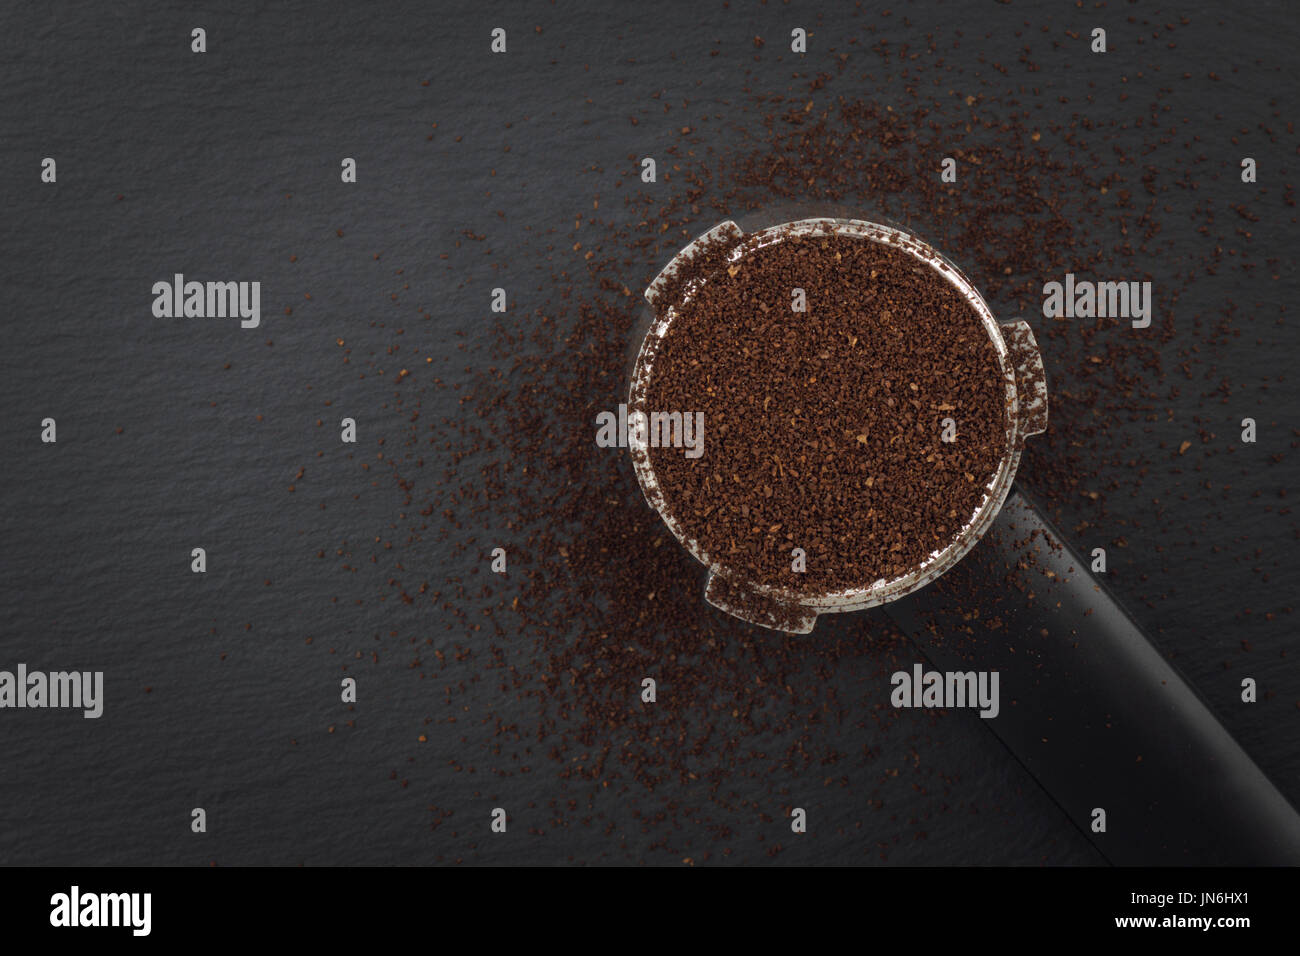 Espresso filter holder for coffee machine  on Black background with copy space Stock Photo